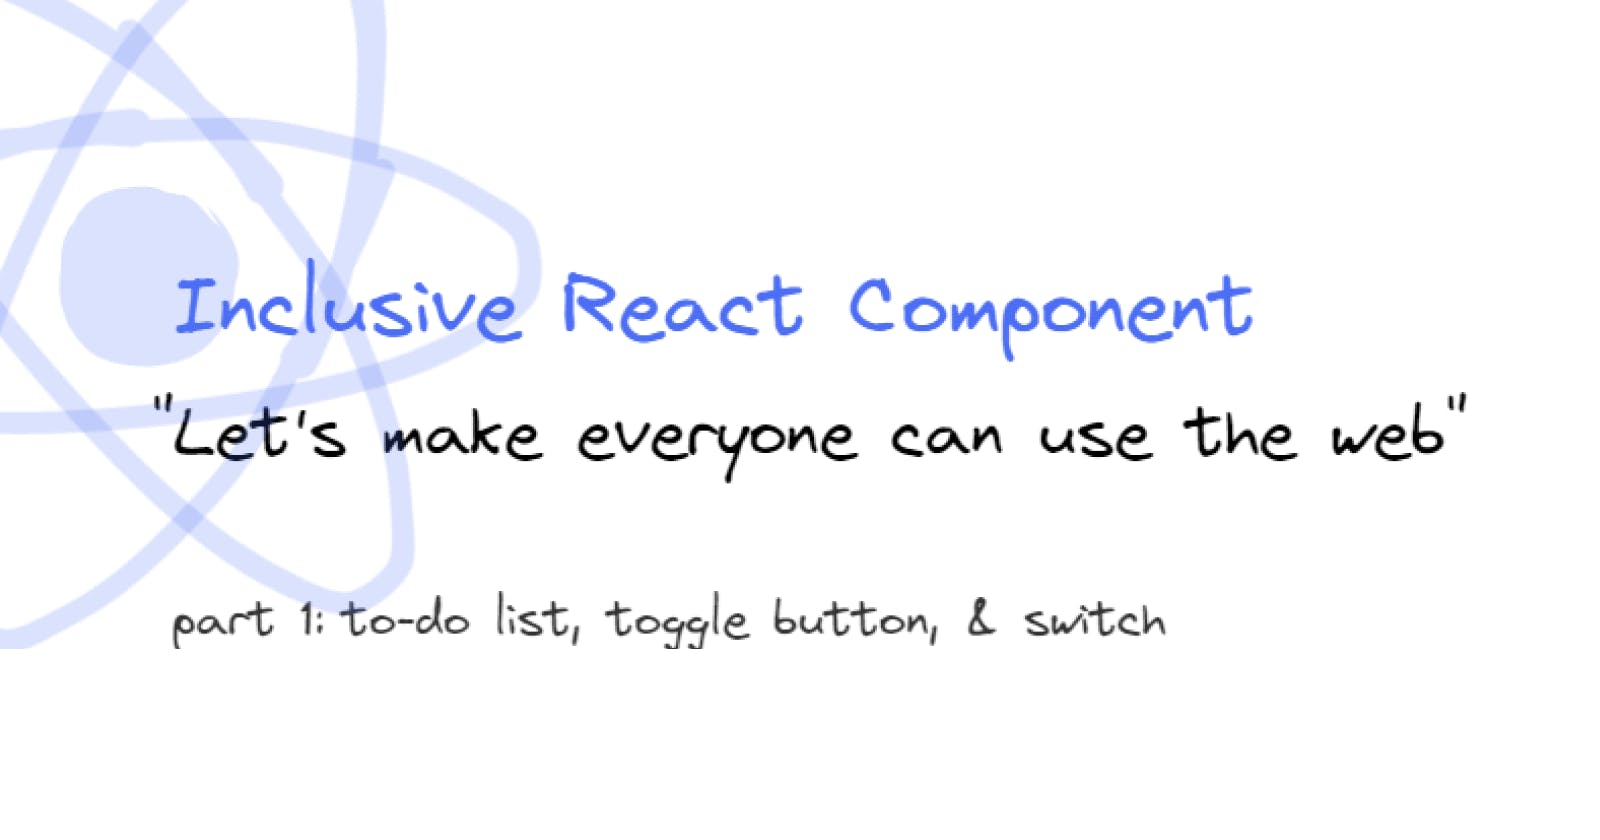 Inclusive React Component: Todo List, Toggle Button, & Switch